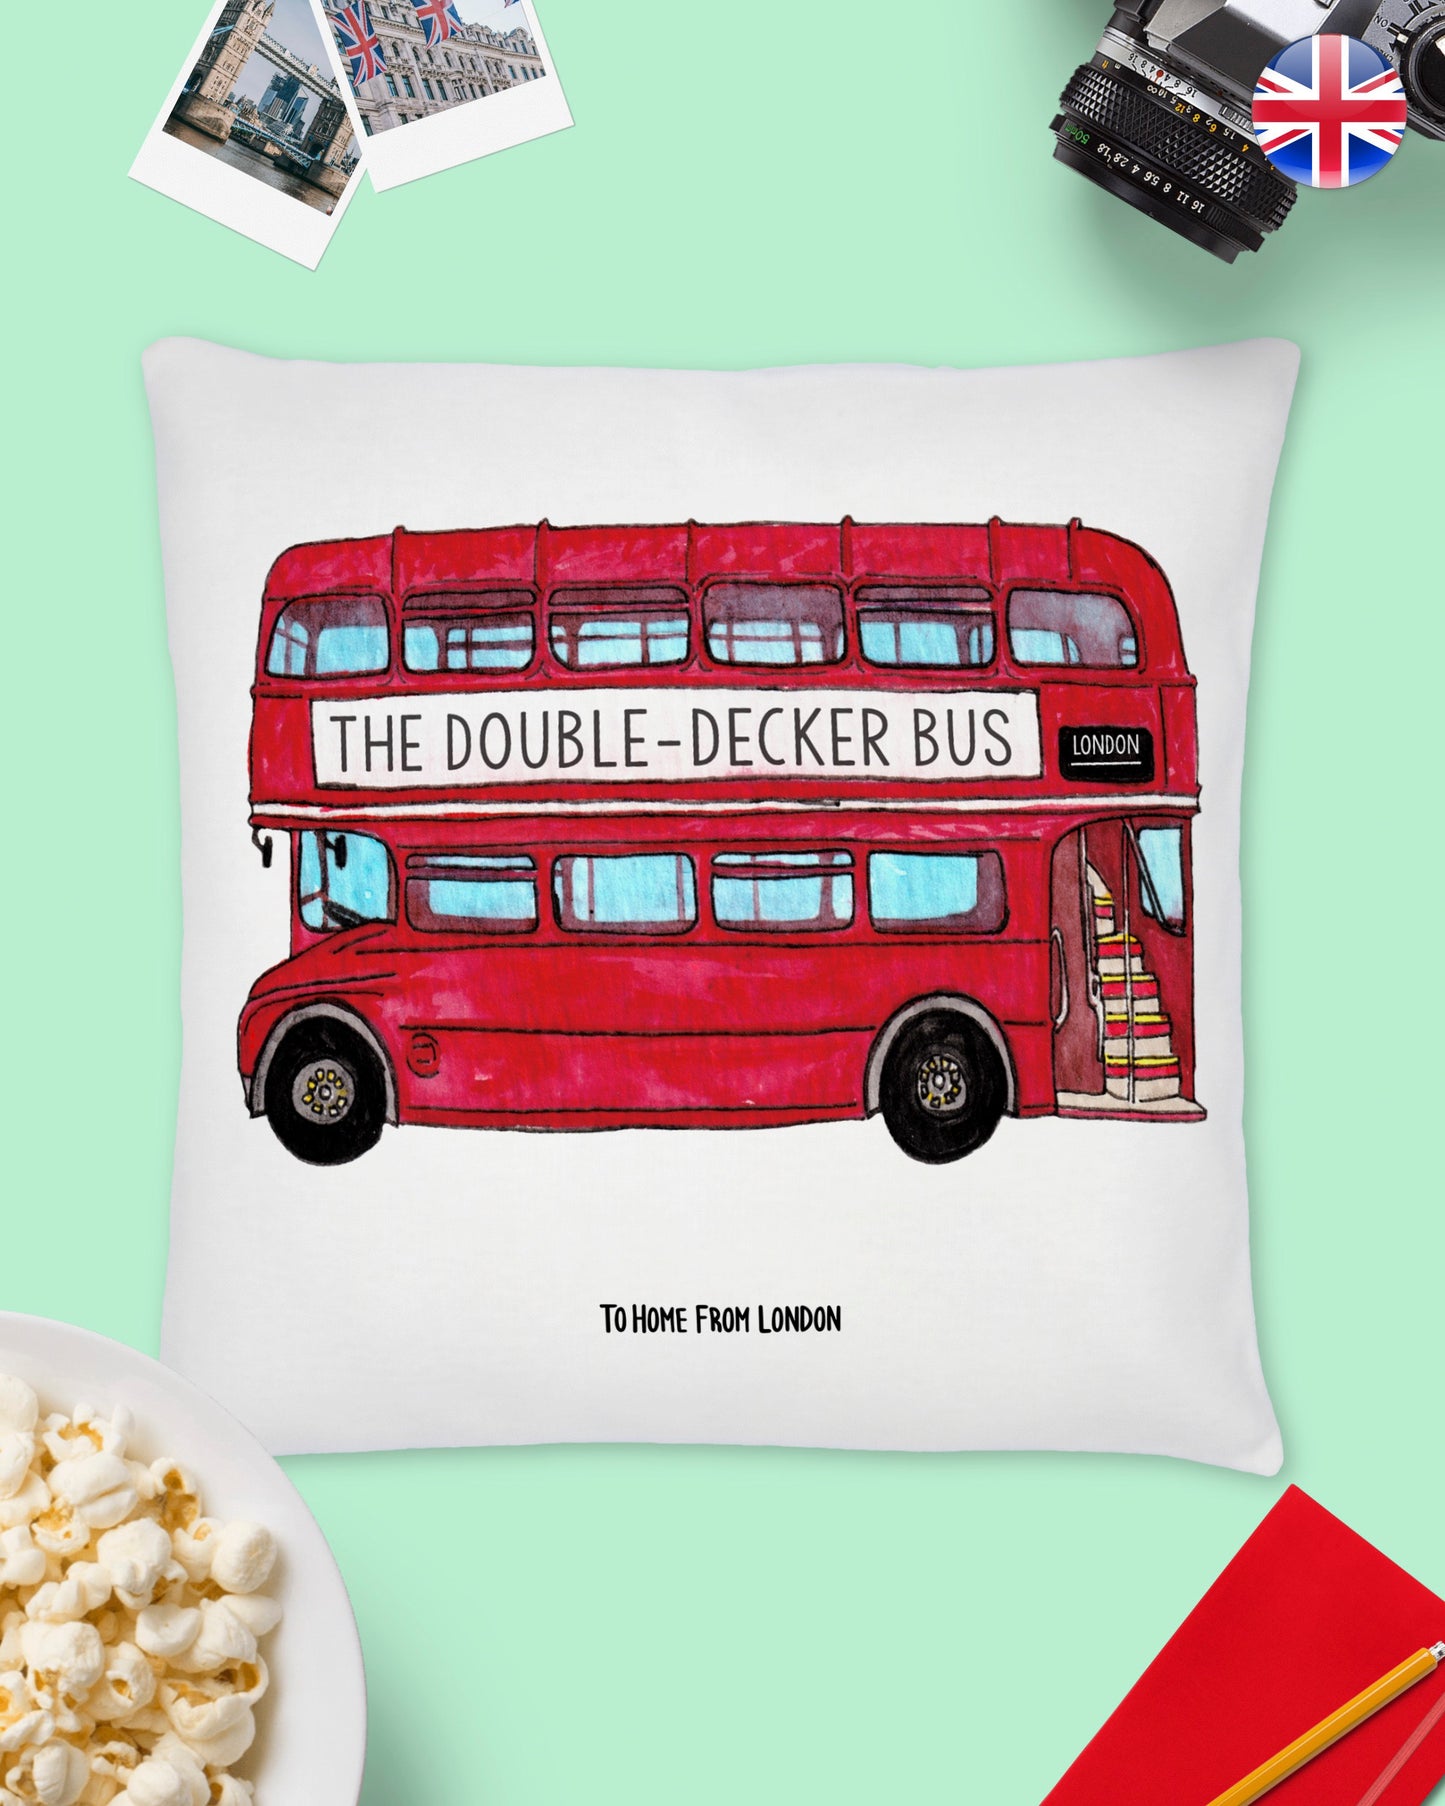 London Cushion Covers - To Home From London